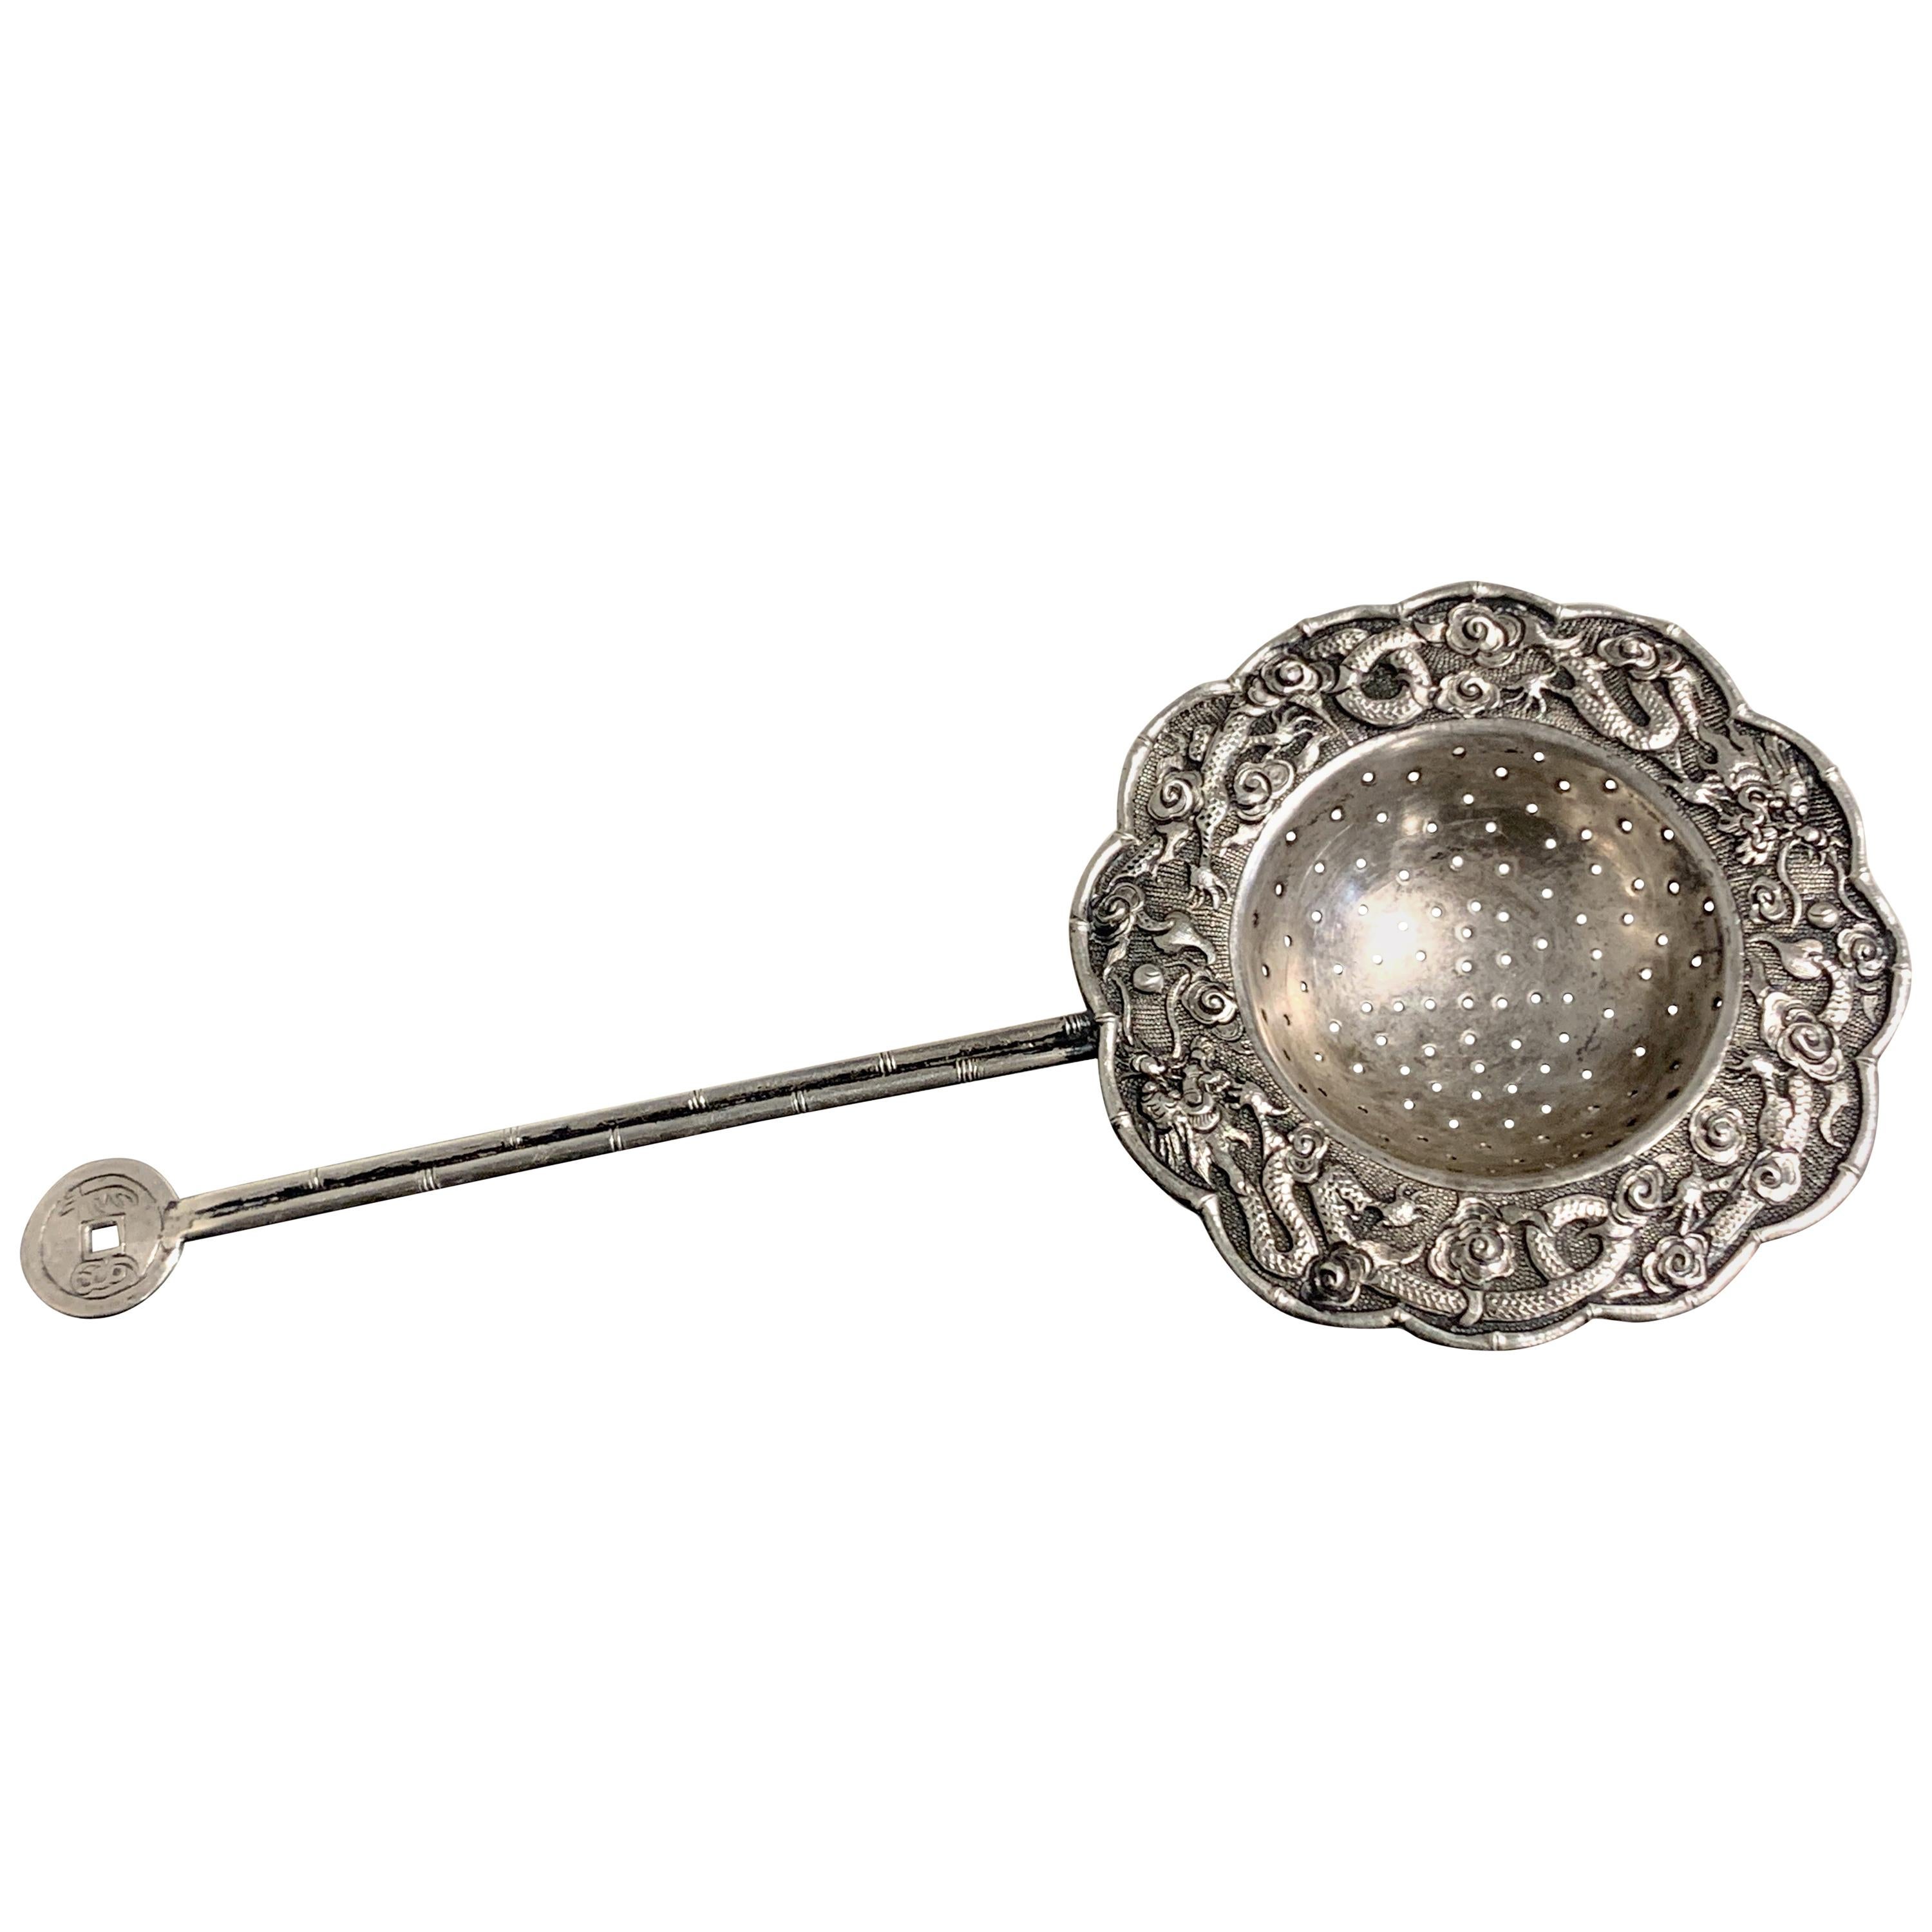 Chinese Qing Dynasty Silver Tea Strainer, Late 19th Century, China